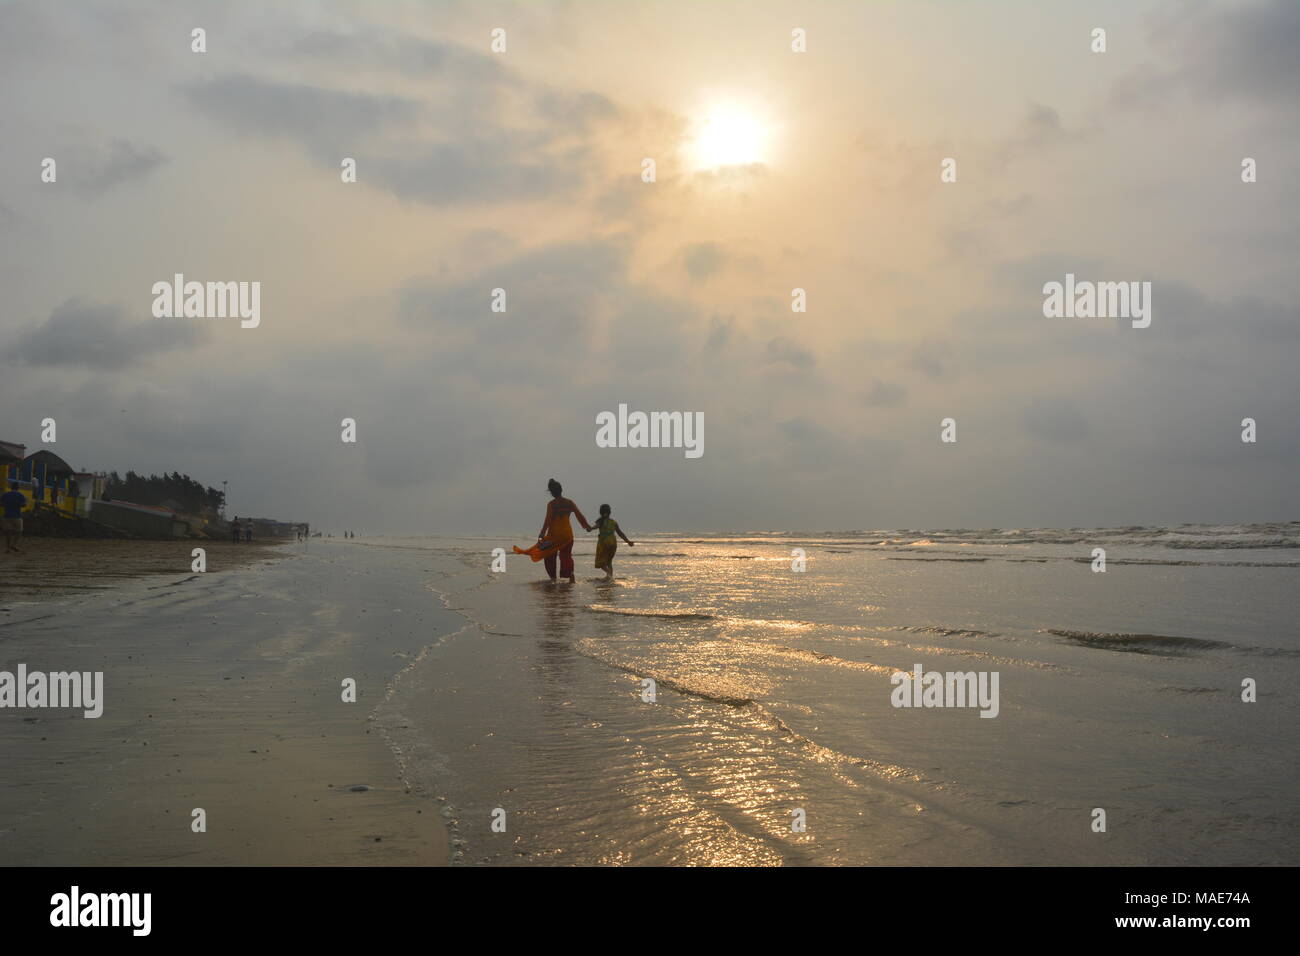 Mandarmani , West Bengal, India. 30th March 2018. Mother and daughter enjoy at Bay of Bengal at sunrise.Mandarmani is a priceless tourist attraction by Bay of Bengal. Credit: Rupa Ghosh/Alamy Live News. Stock Photo